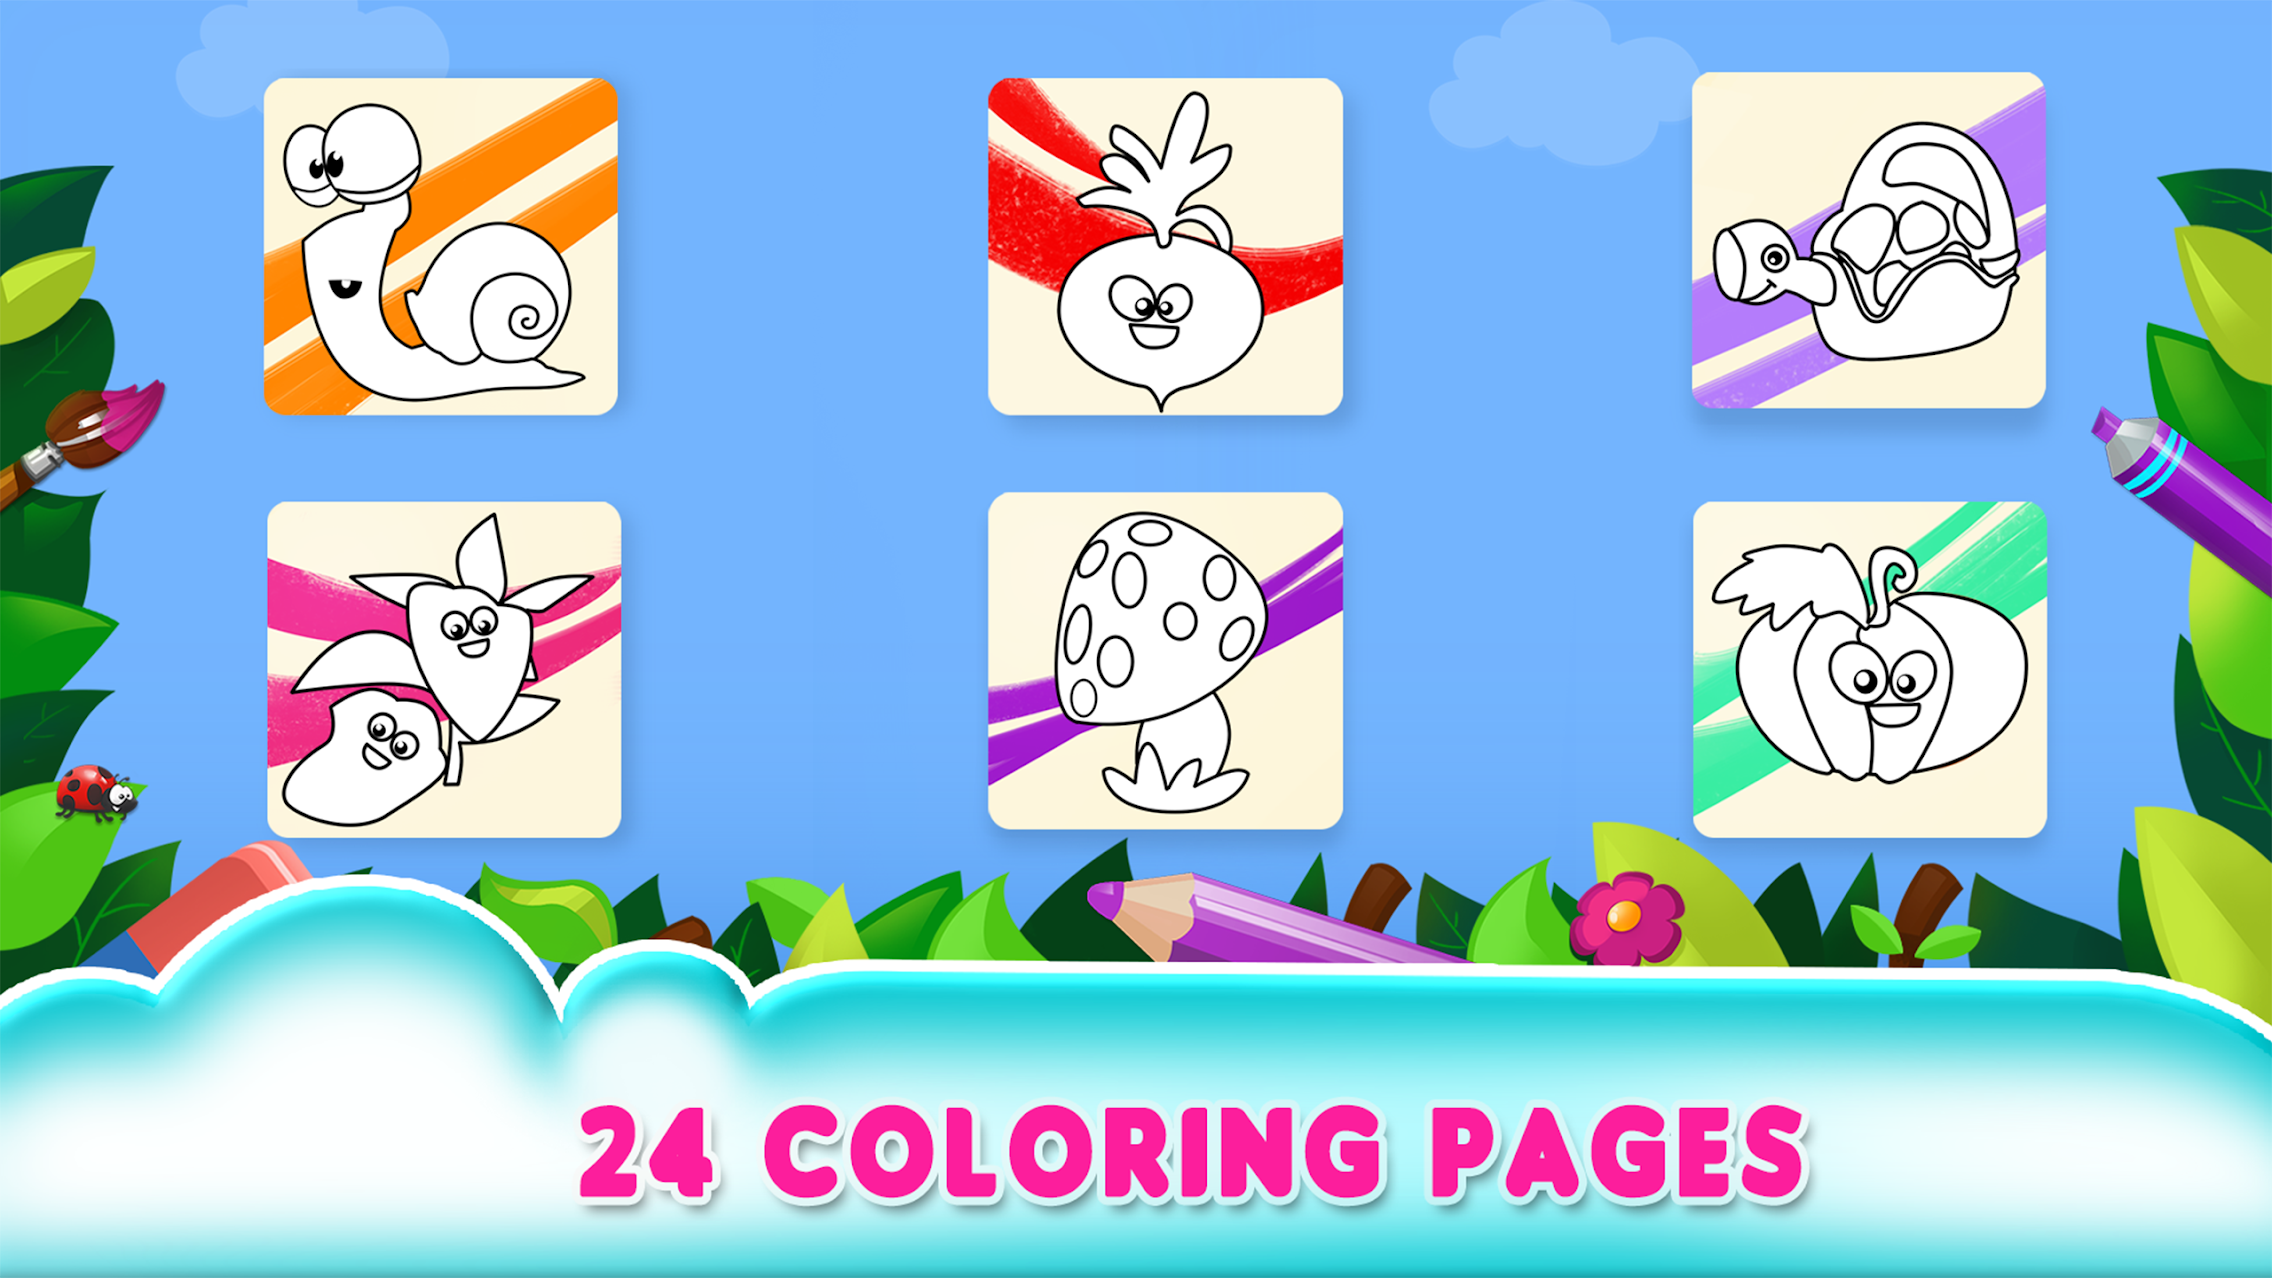 Coloring games for kids 2-3 year olds